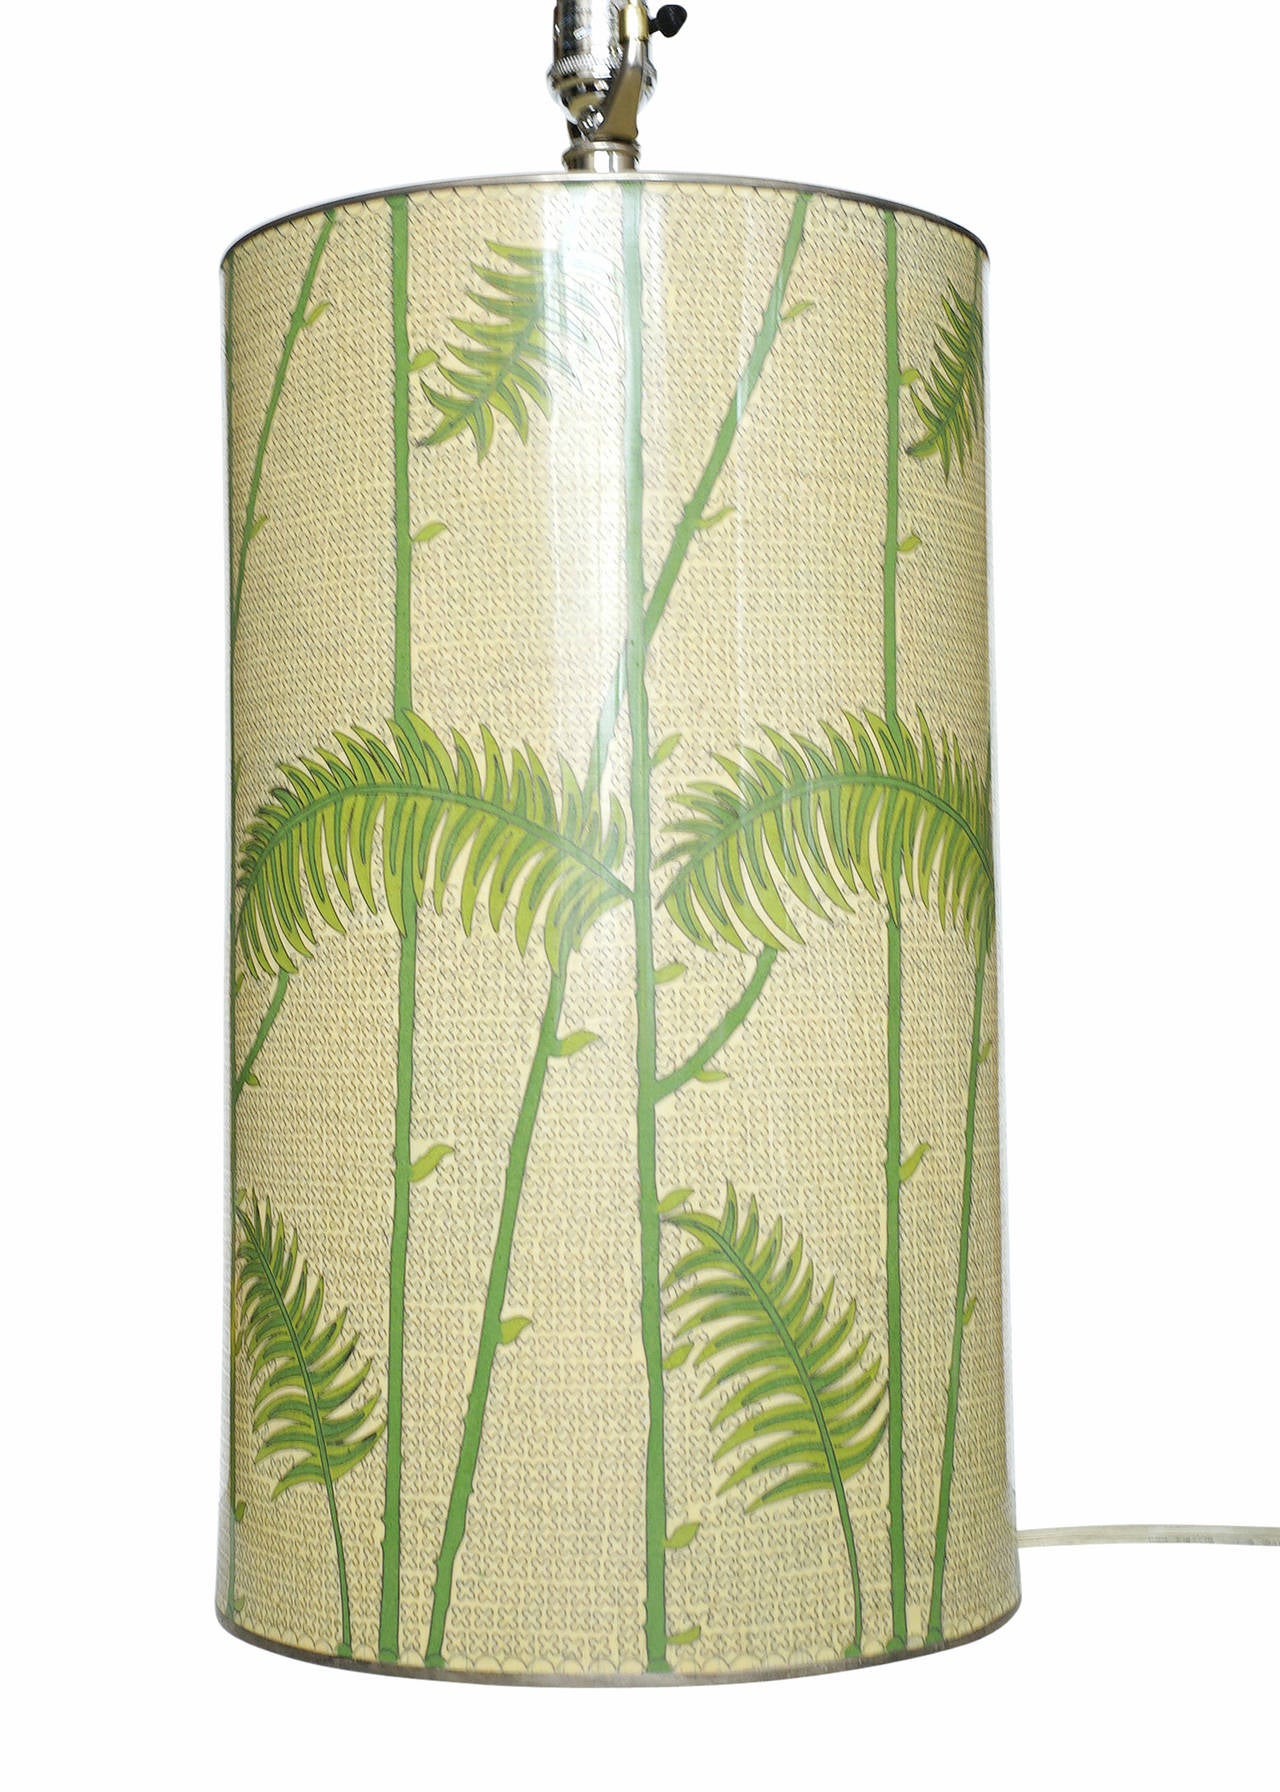 This Mid-century enameled cloisonne´ table lamp features a playful, modern, tropical getaway motif complete with geometric patterns and palm tree branches. The large ten-inch base is one sized from bottom to top and features patterns all